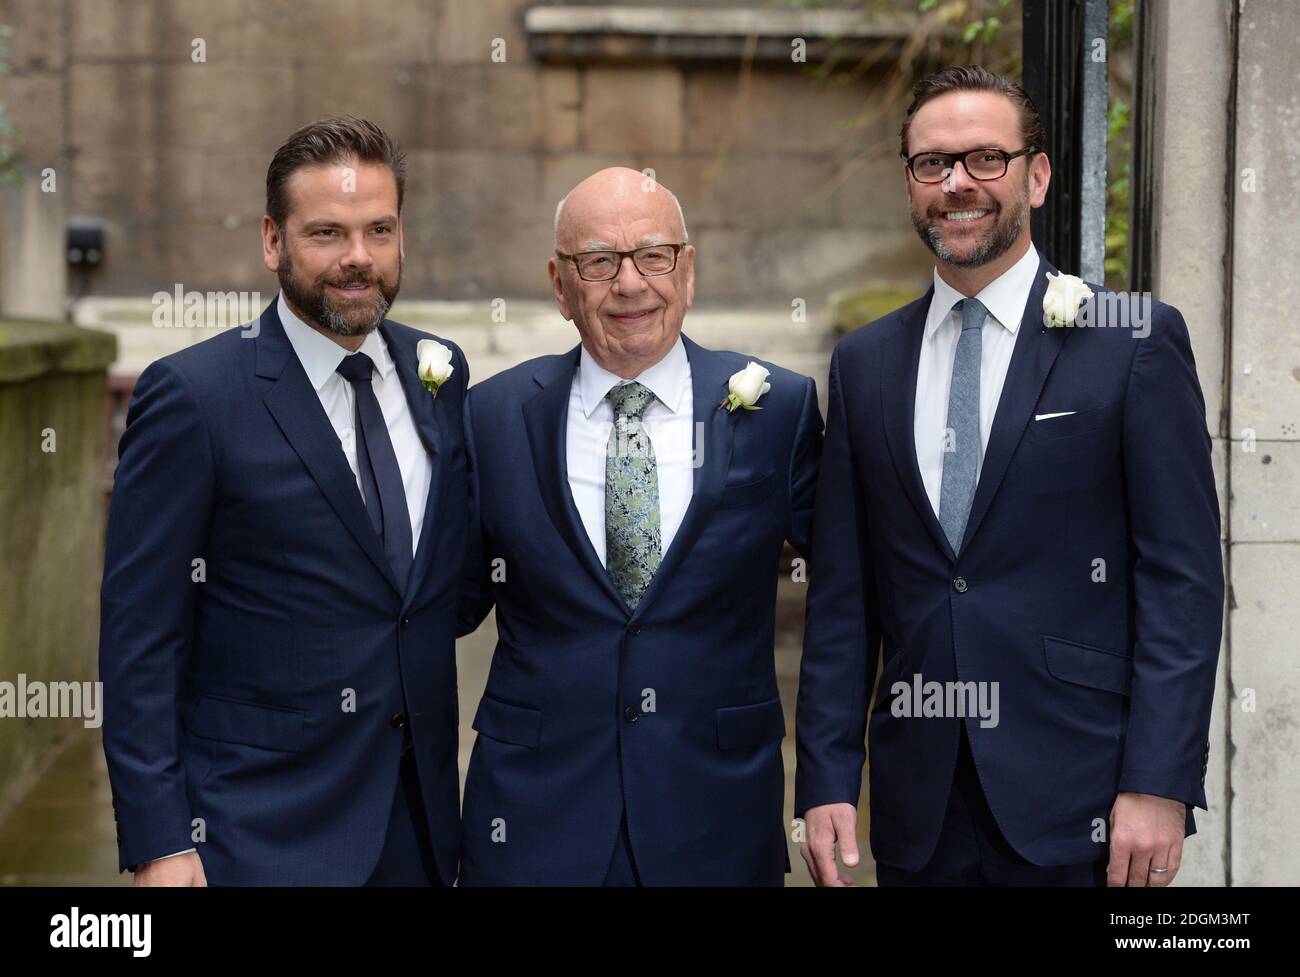 Rupert Murdoch accompanied by his sons James (right) and Lachlan (left) attending the Rupert Murdoch and Jerry Hall Wedding Blessing at St Brides Church, Fleet St, London Stock Photo